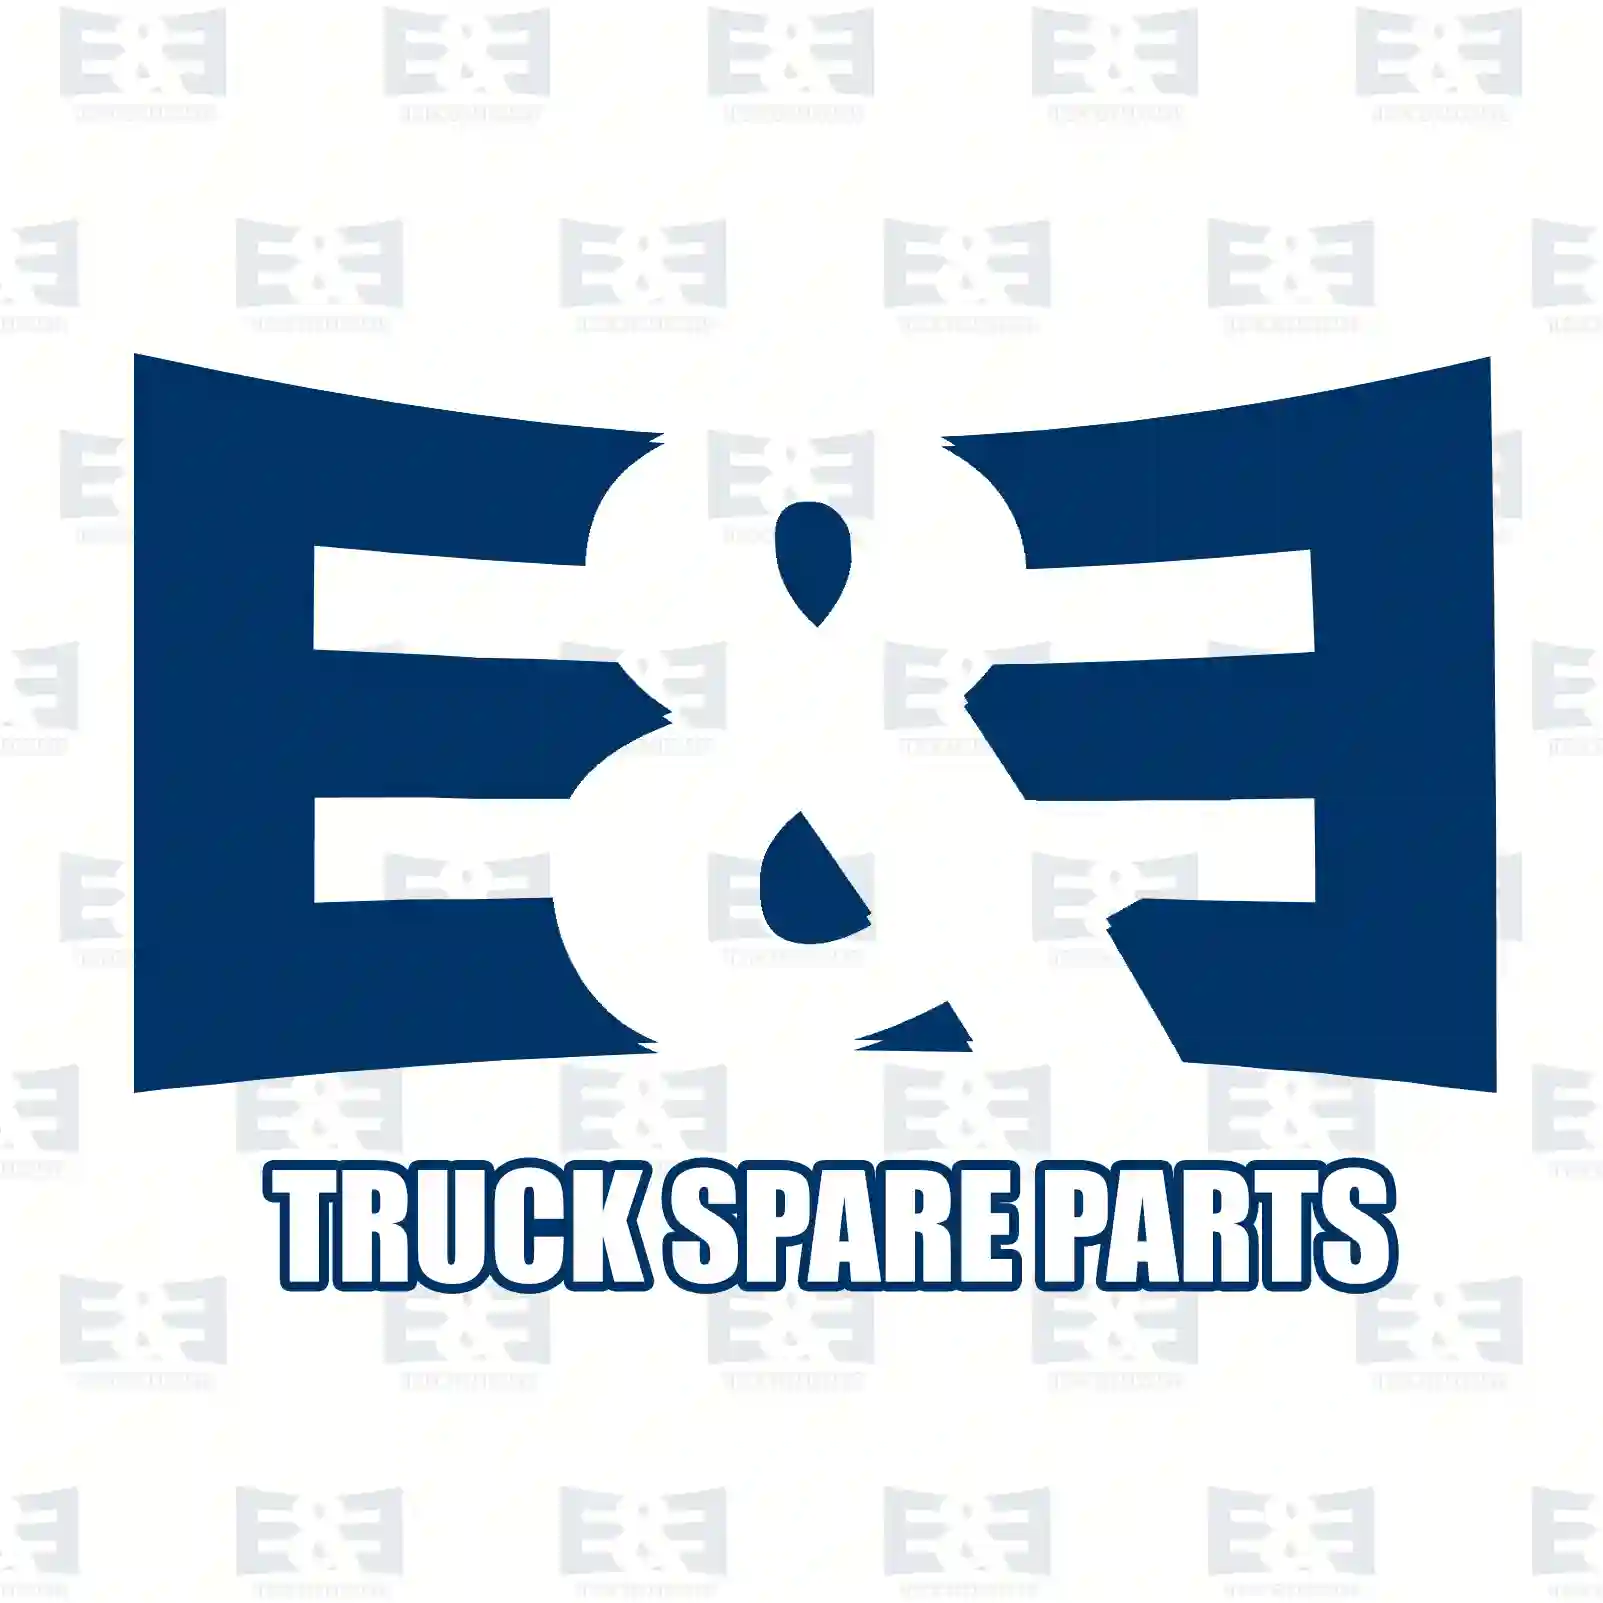  Bearing joint, clutch cylinder || E&E Truck Spare Parts | Truck Spare Parts, Auotomotive Spare Parts